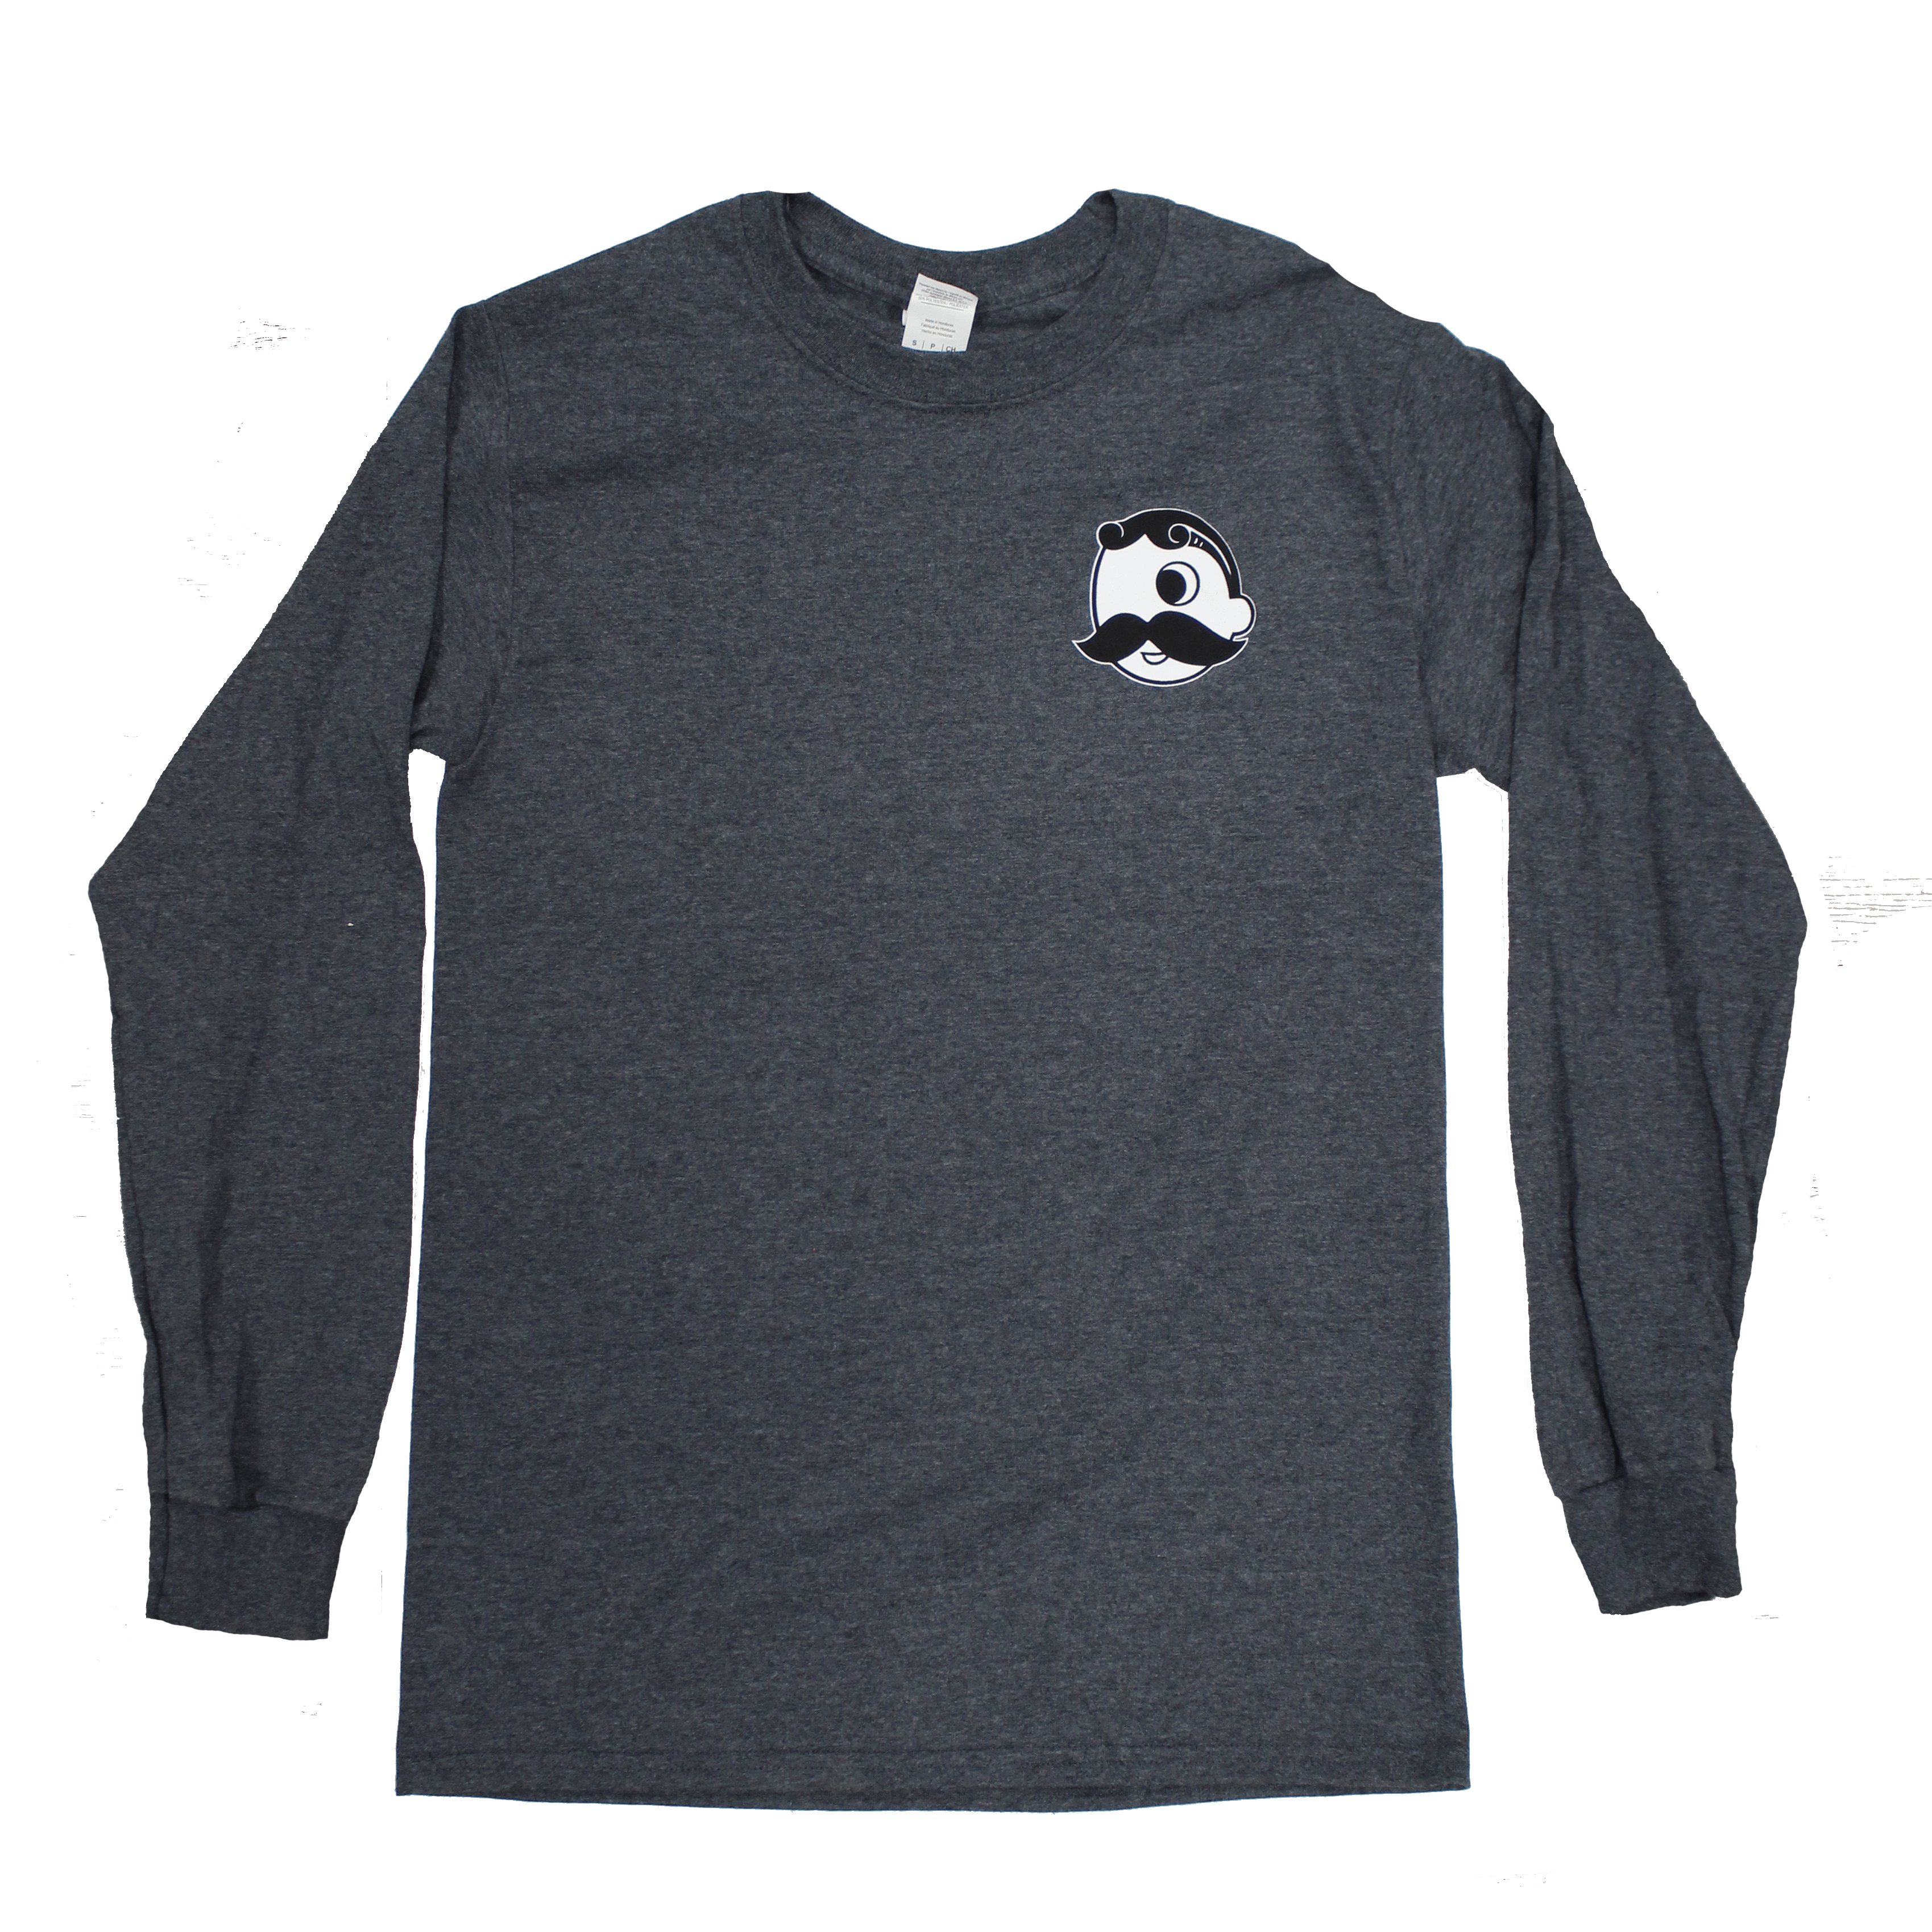 Natty Boh Can Crab (Dark Heather) / Long Sleeve Shirt - Route One Apparel